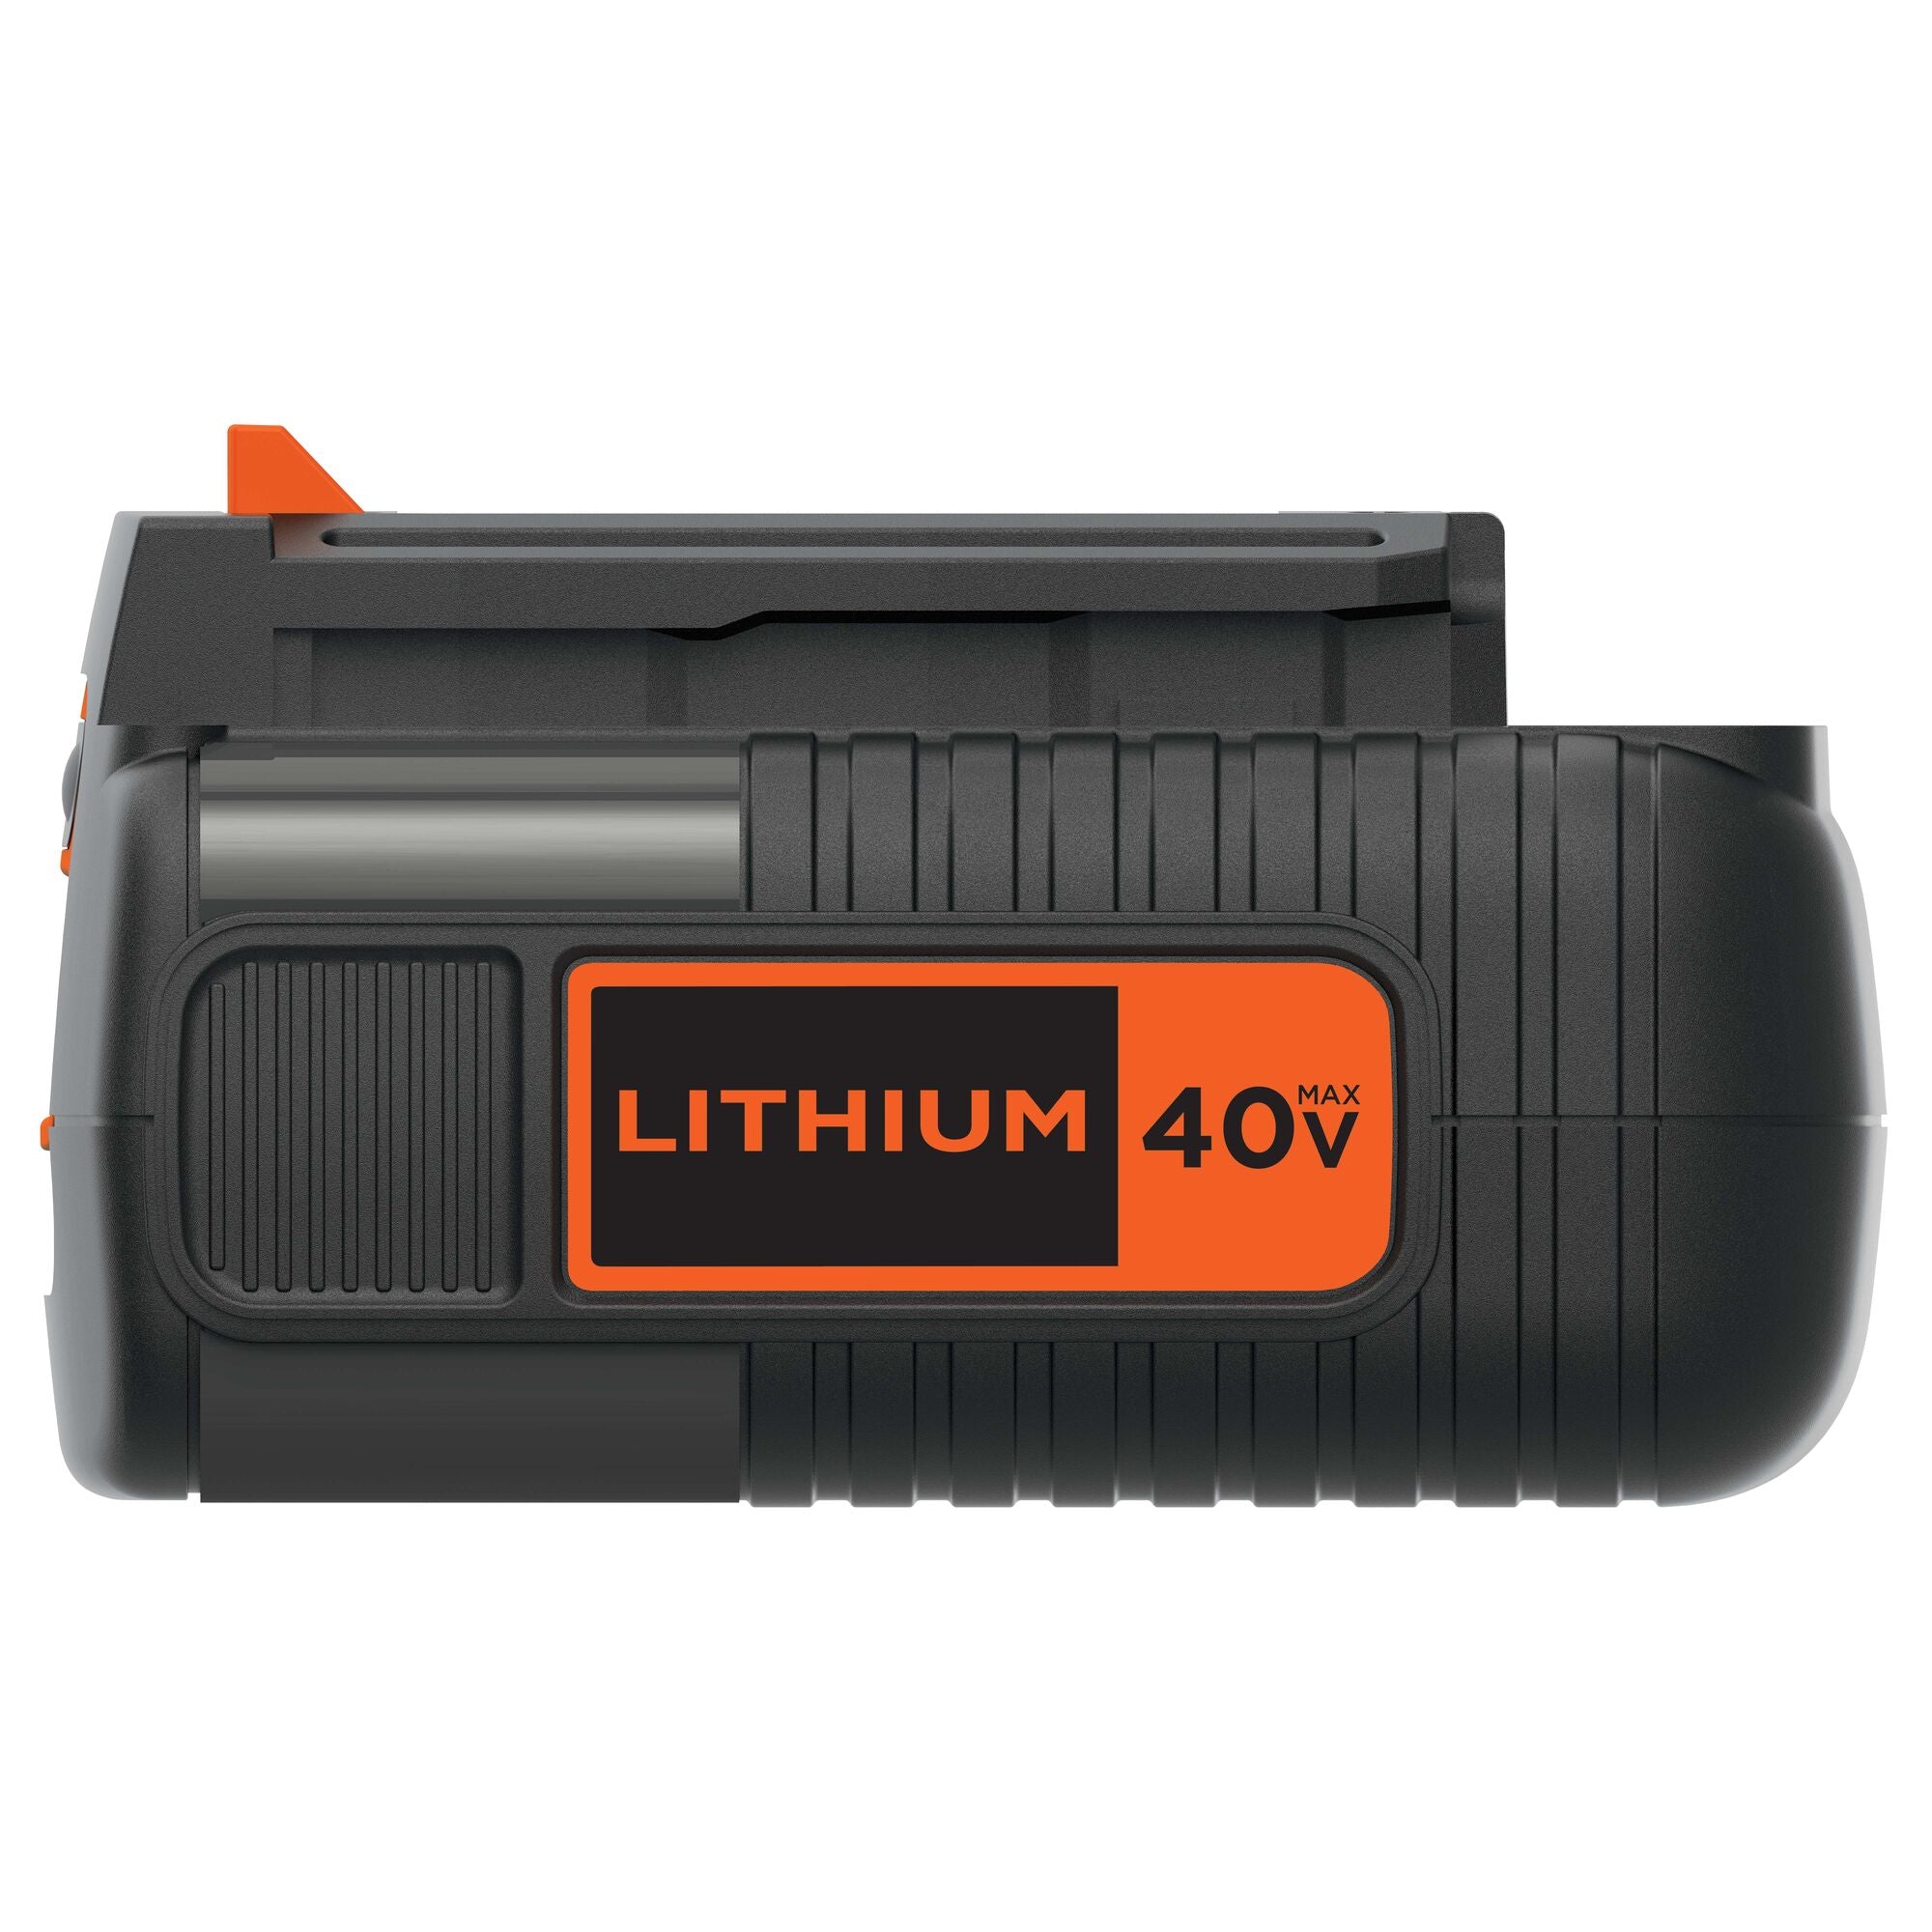 Graphic detailing key features of the 40V Max battery